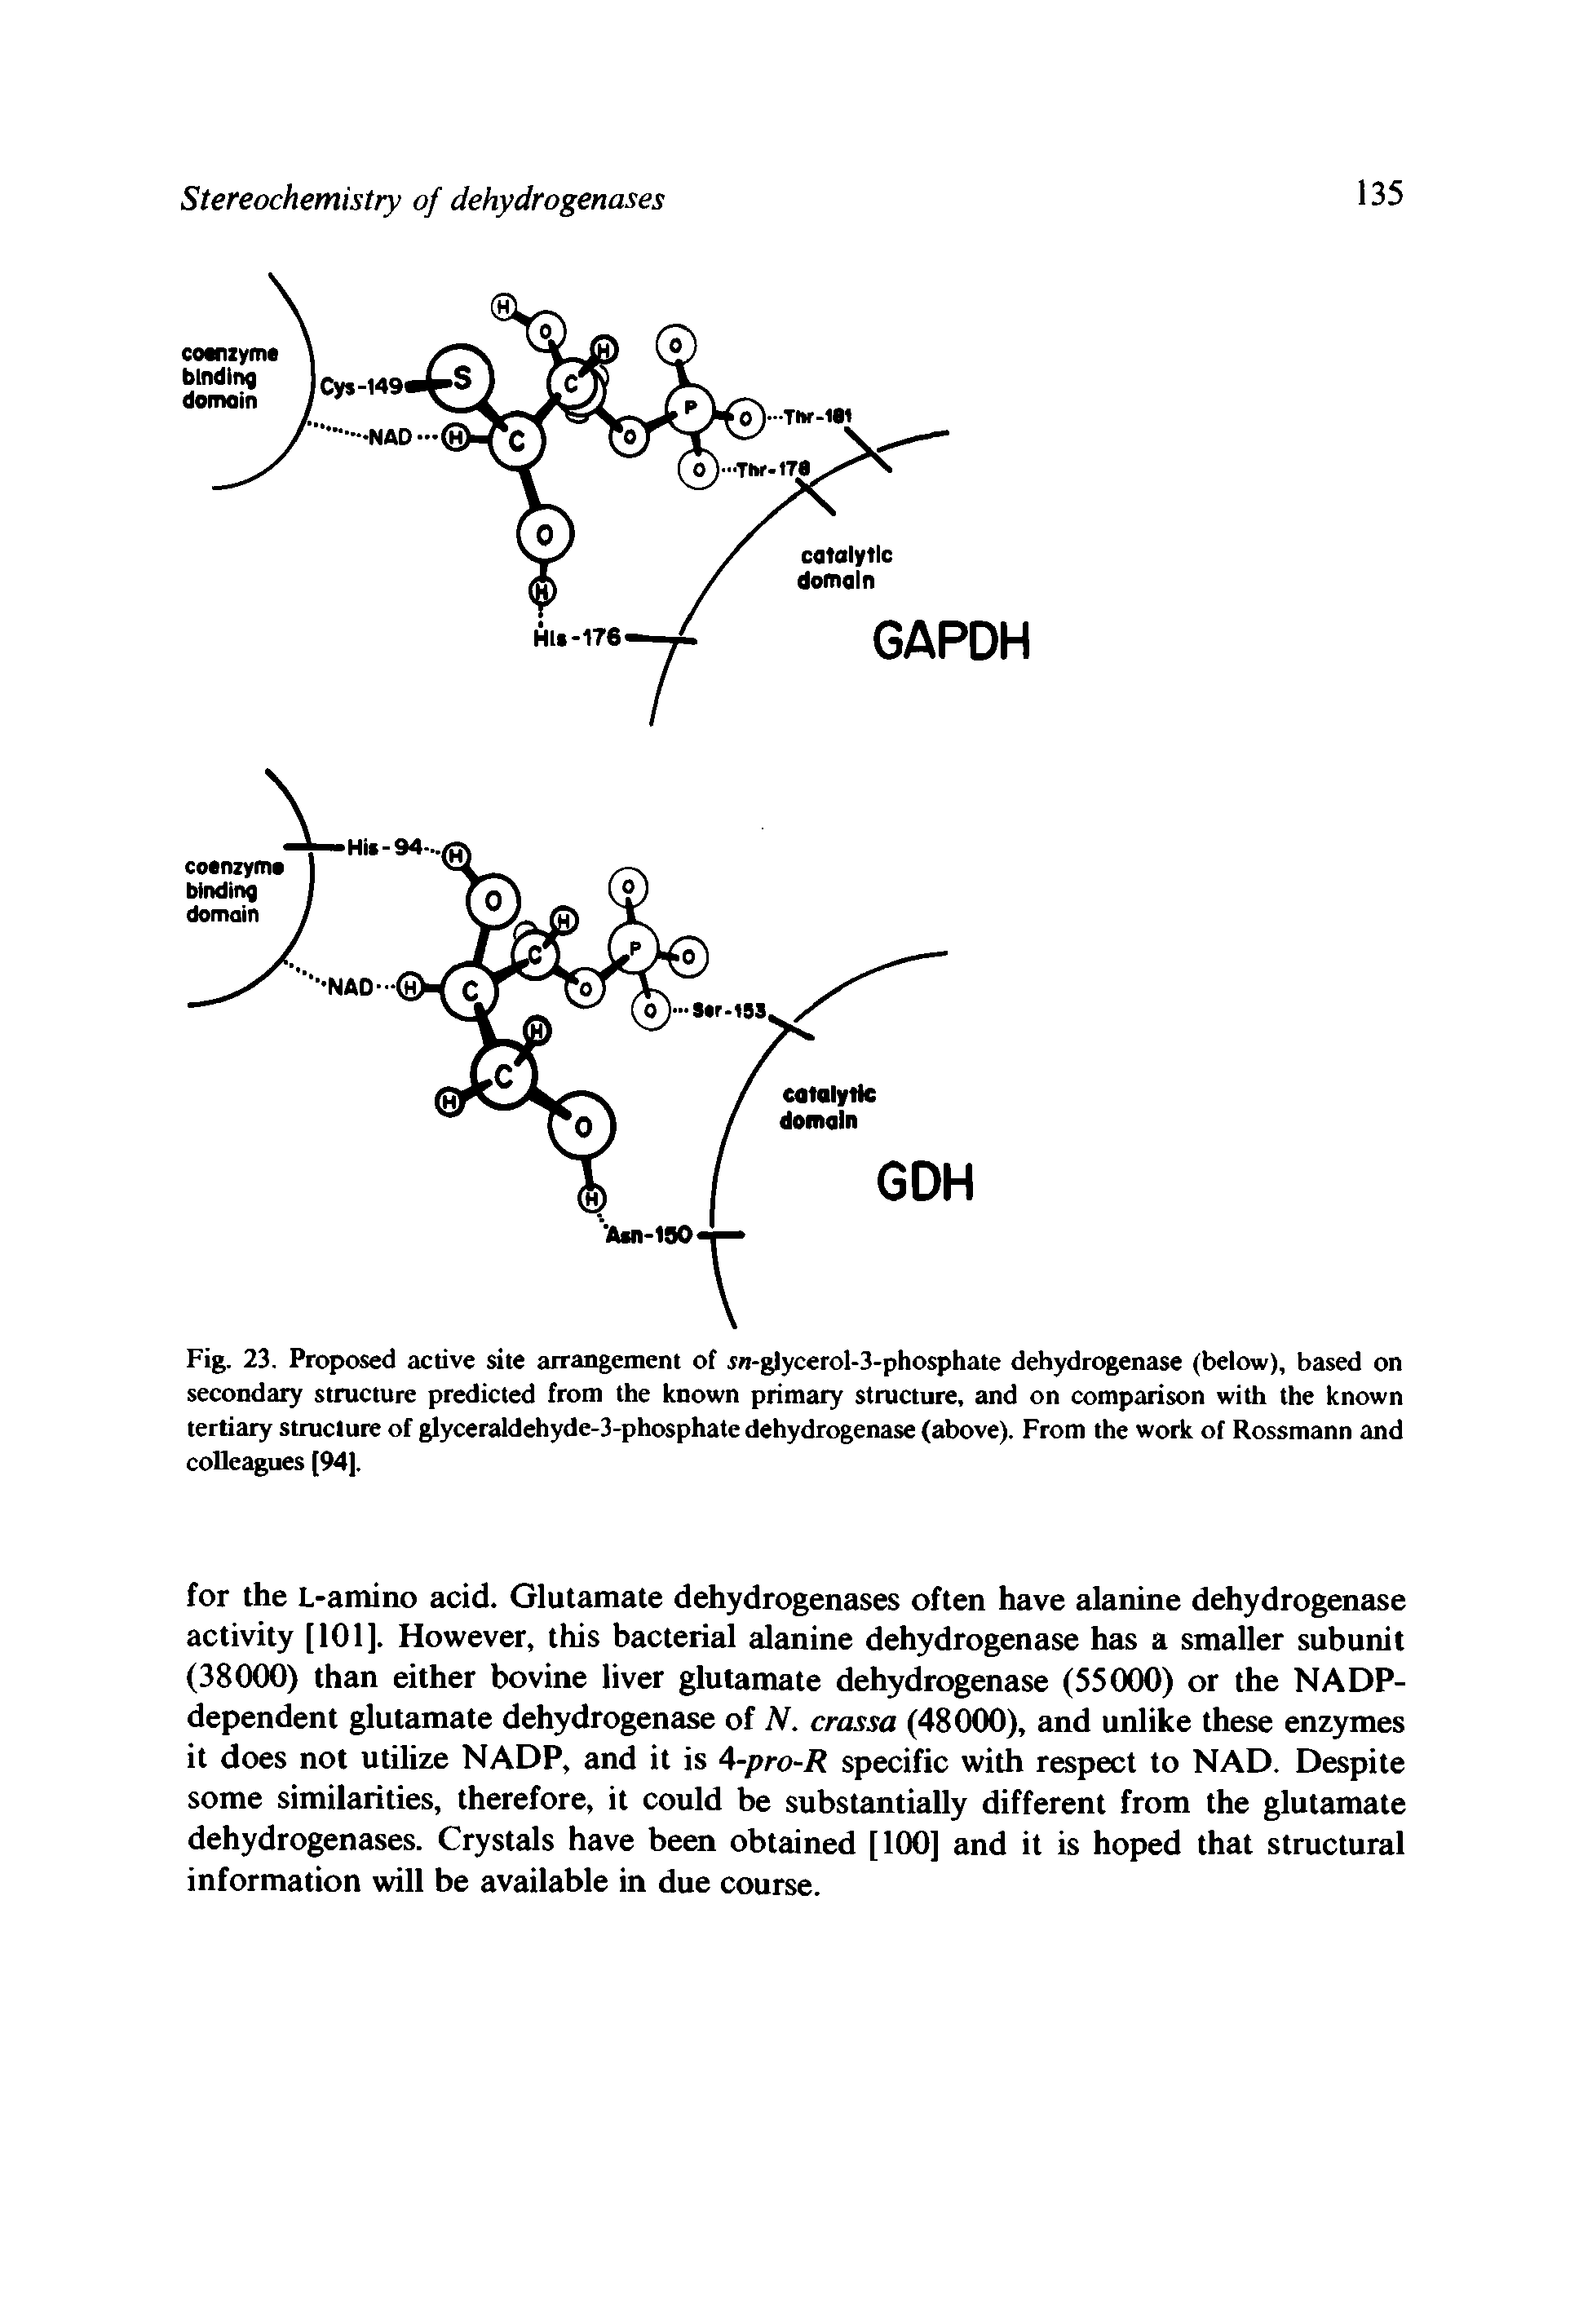 Fig. 23. Proposed active site arrangement of sn-glycerol-3-phosphate dehydrogenase (below), based on secondary structure predicted from the known primary structure, and on comparison with the known tertiary structure of glyceraldehyde-3-phosphate dehydrogenase (above). From the work of Rossmann and colleagues (94).